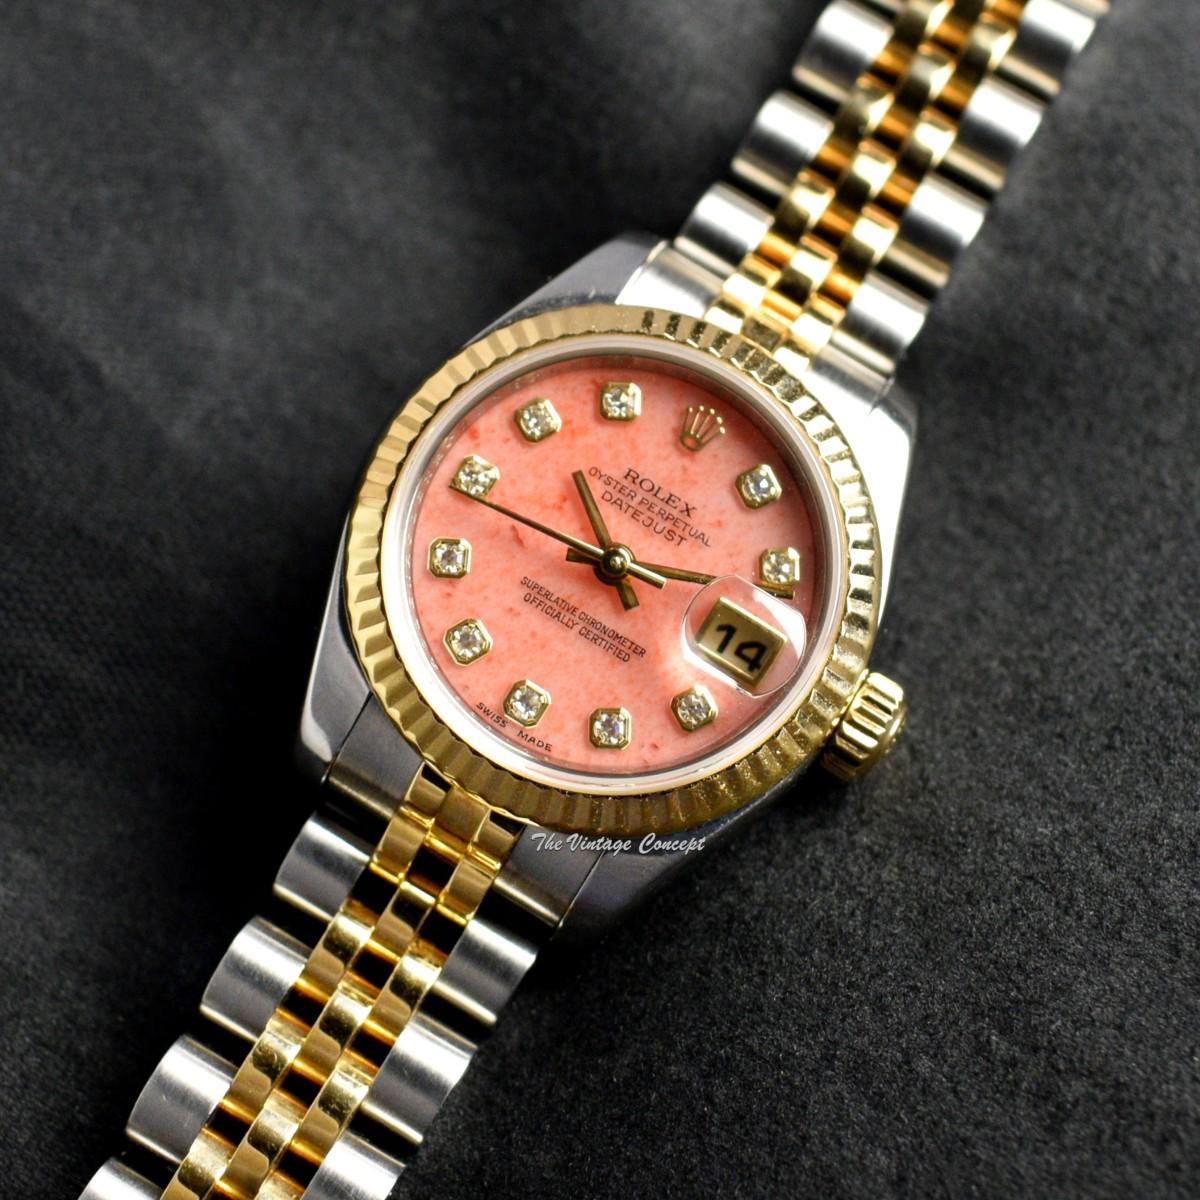 Rolex Lady Datejust Yellow Gold & Steel Coral Stone Dial Diamond Indexes 179173 w/ Guarantee Card  (SOLD)